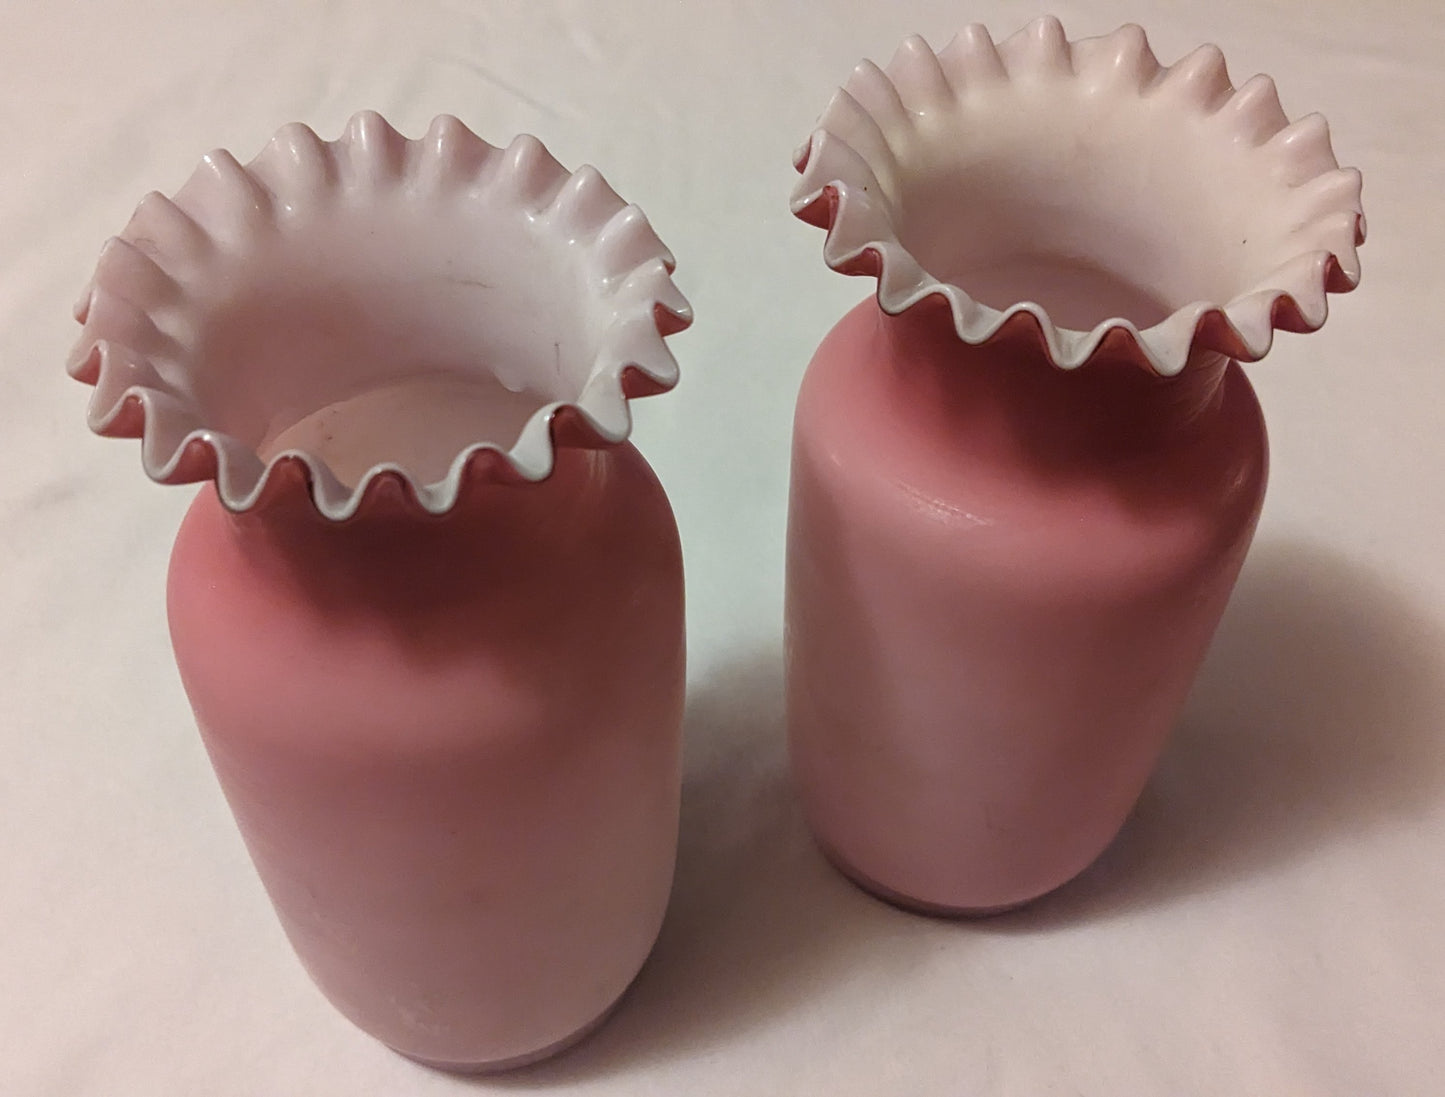 Vintage VASES; PAIR; Fenton-Style Ruffled Top; Rose Ombre Satin Glass - Hand Blown - Granny core